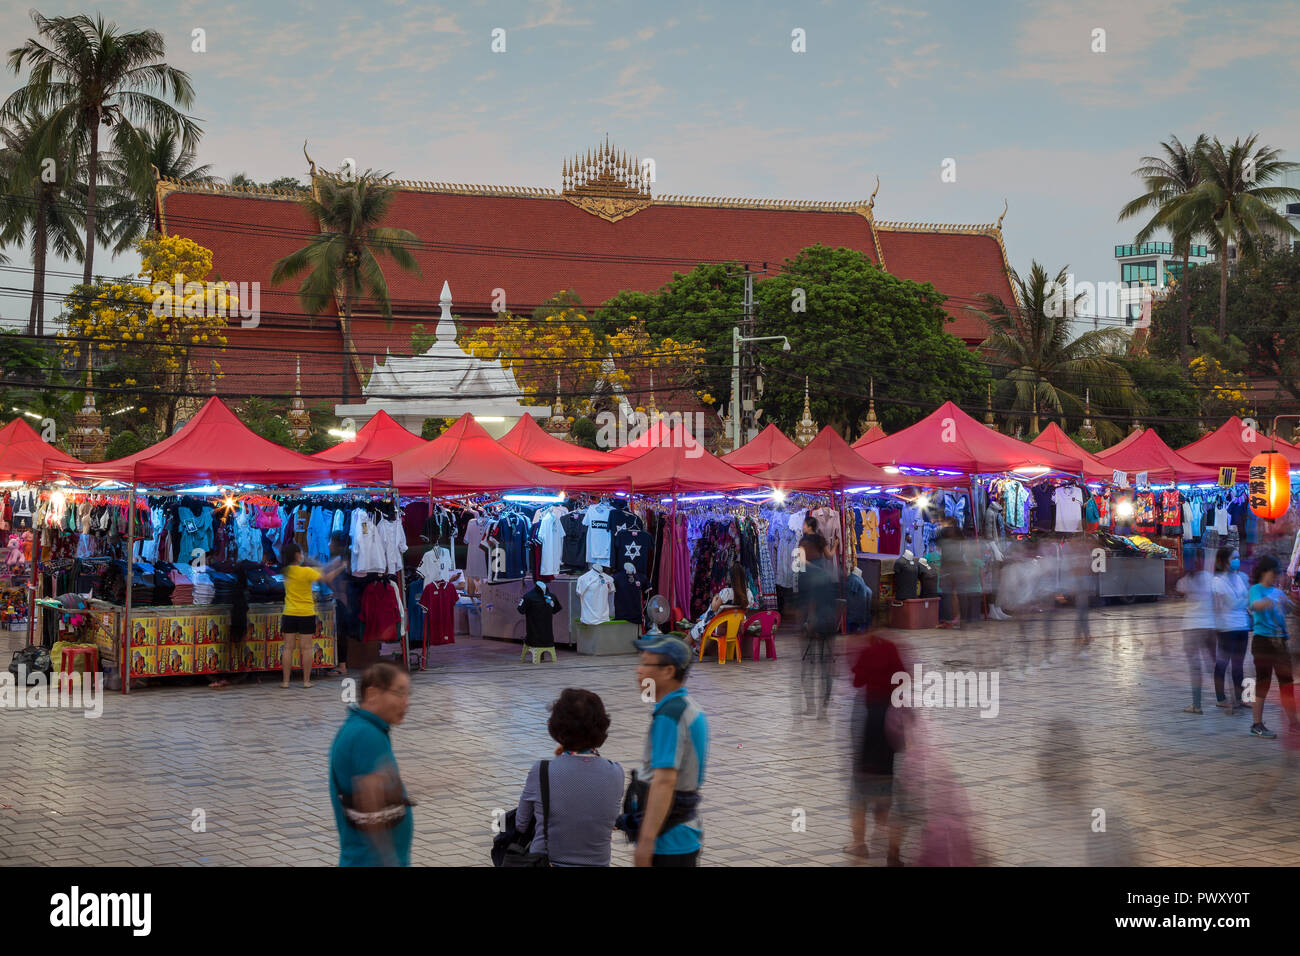 People and many stalls full of clothes at the famous Night Market in Vientiane, Laos, at dusk. Wat Chanthaburi (Chanthaboury Temple is in background. Stock Photo